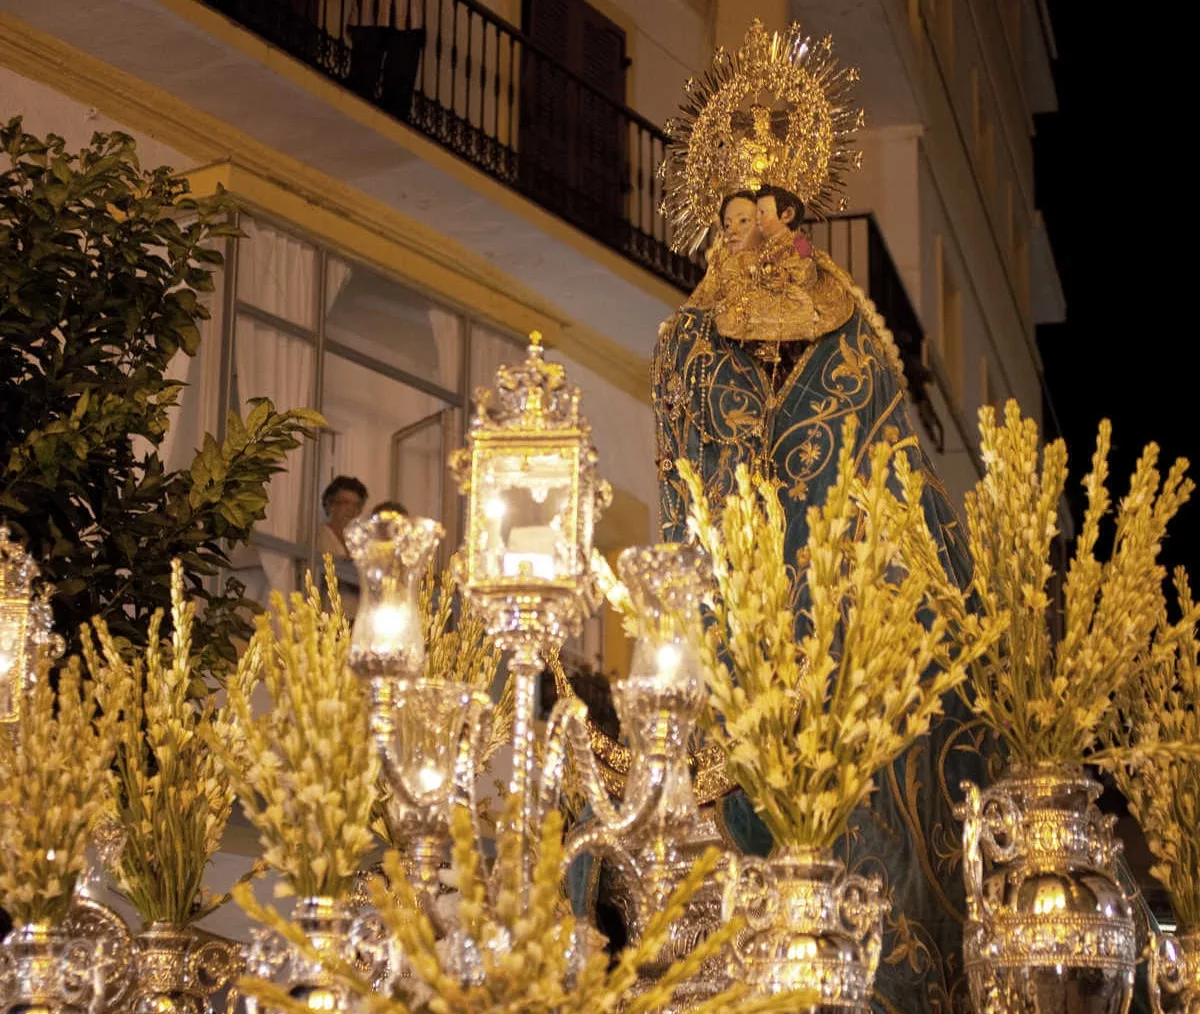 In Spain's Andalucia, religious floats commonly parade through town